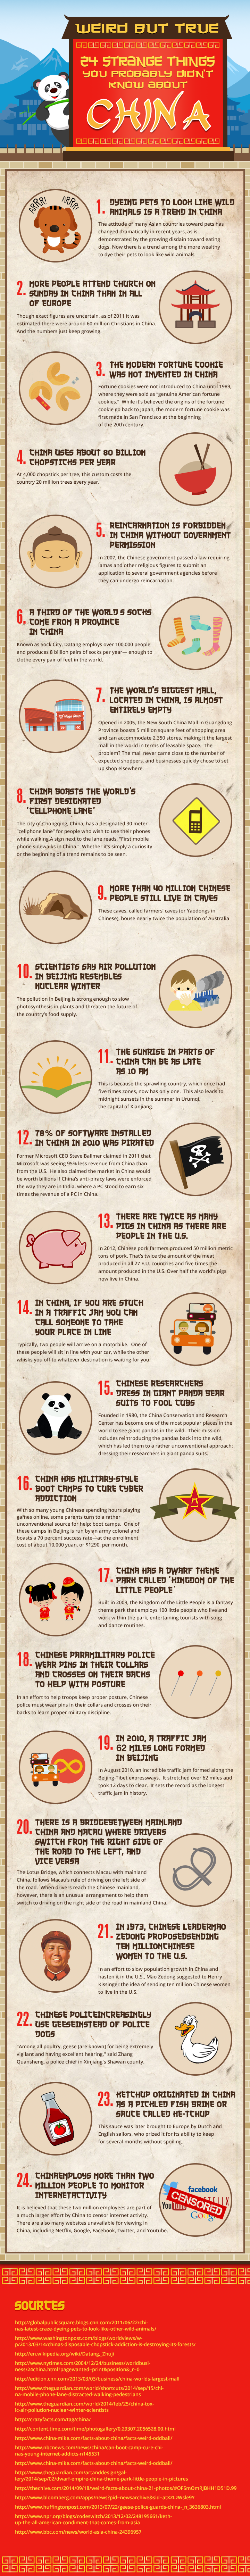 Infographic:24 Strange Things You Probably Didn’t Know About China